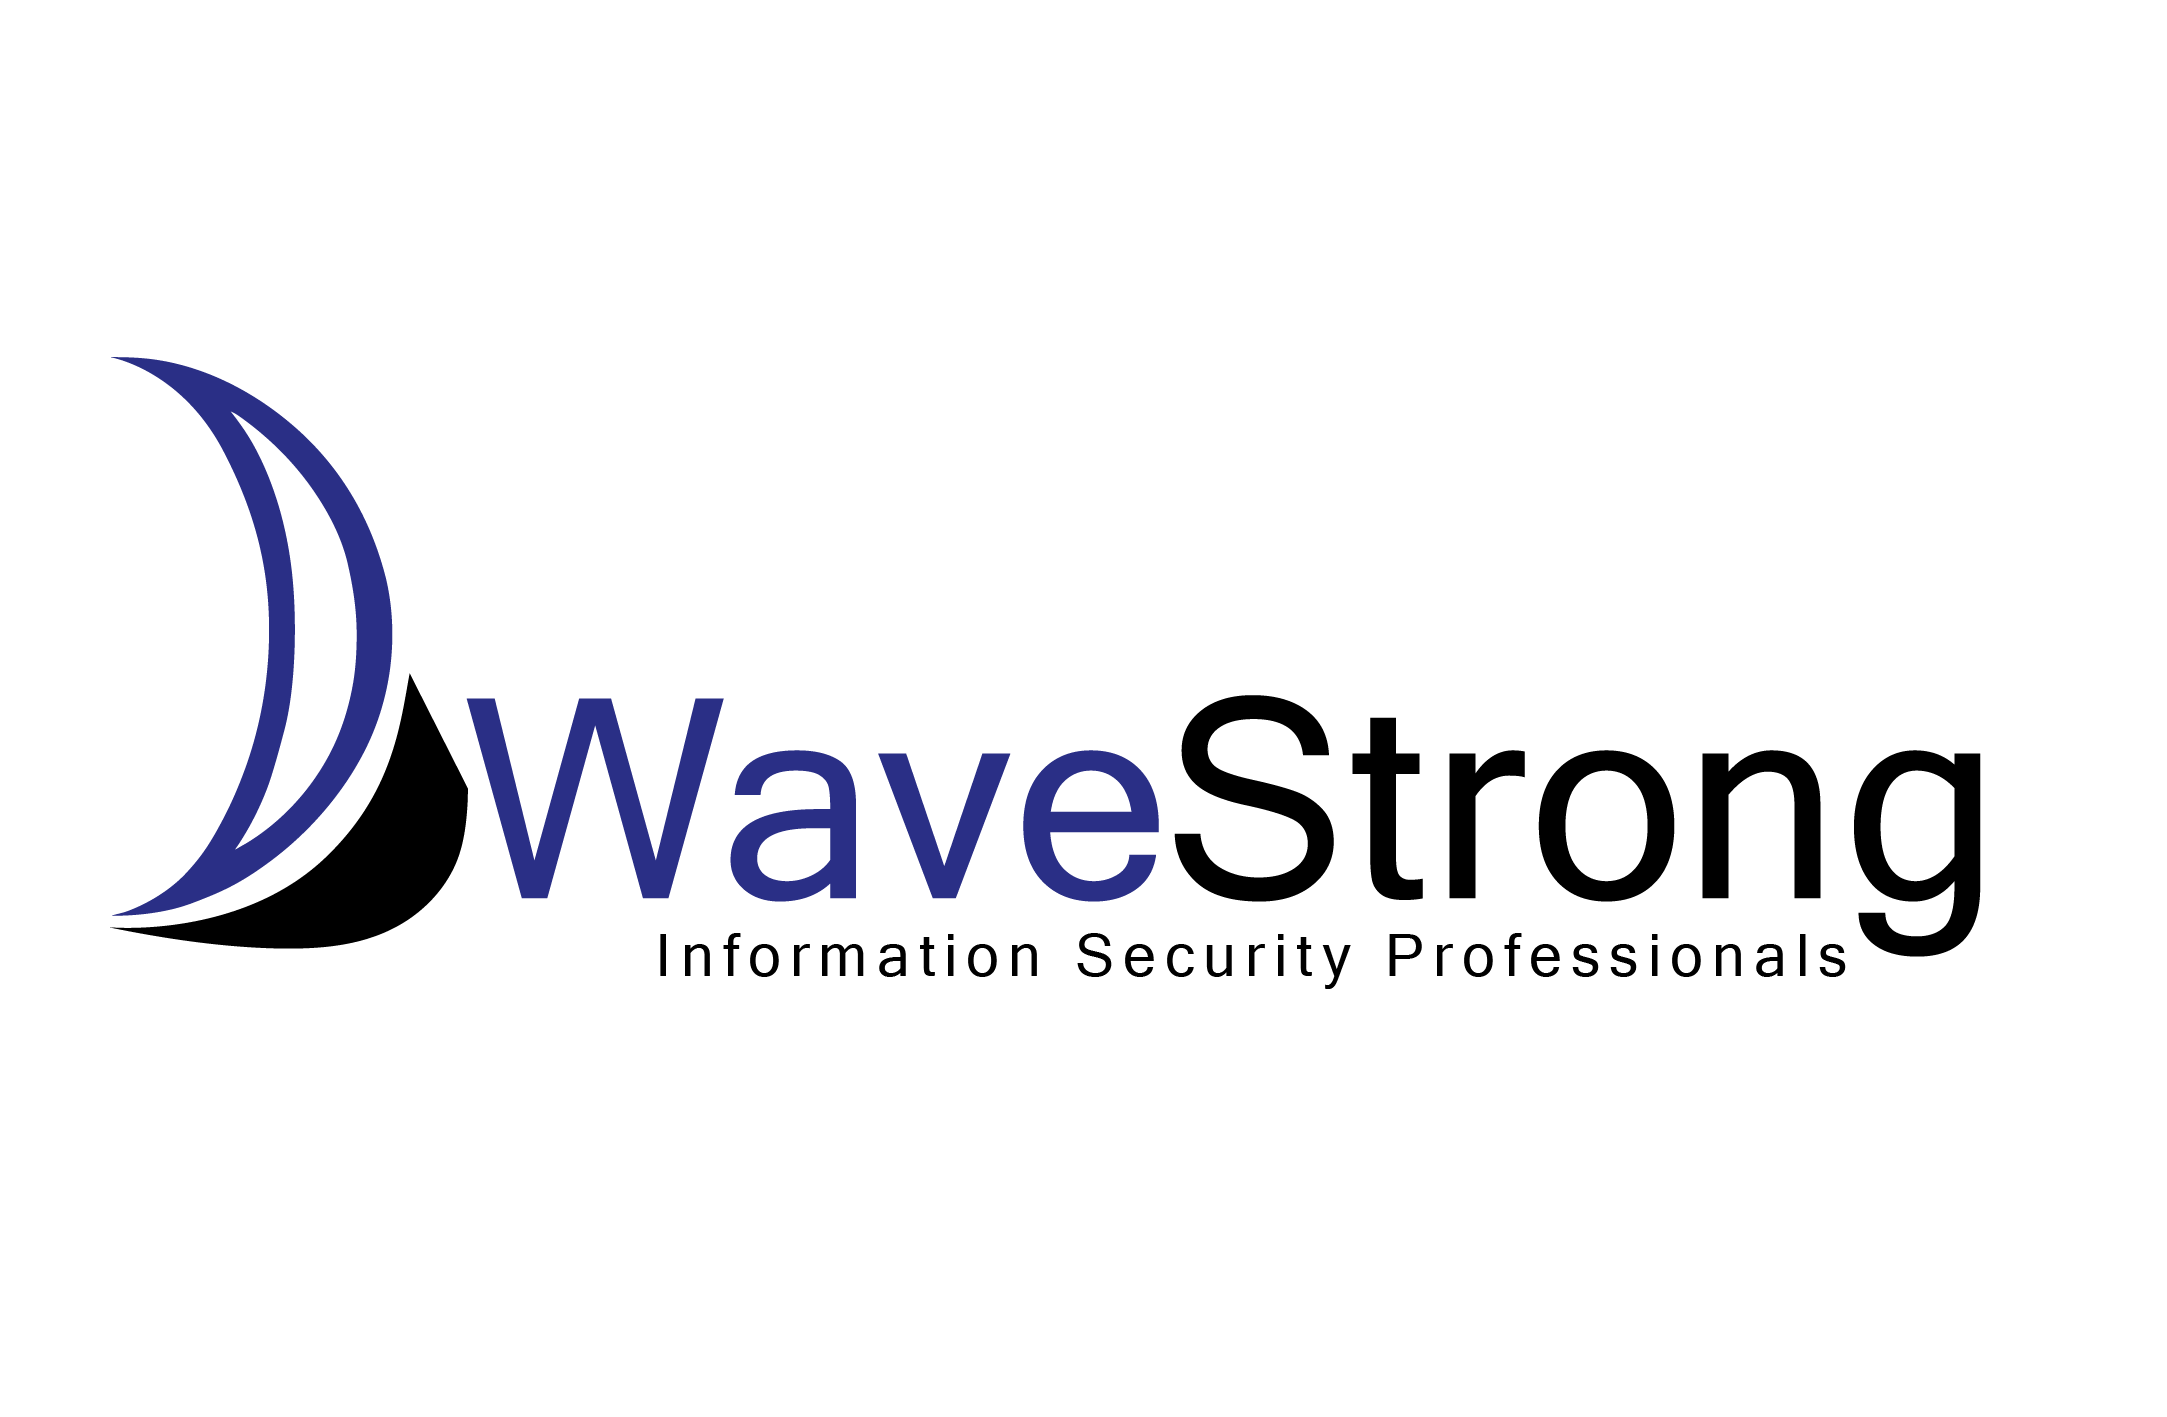 WaveStrong Information Security Professionals logo